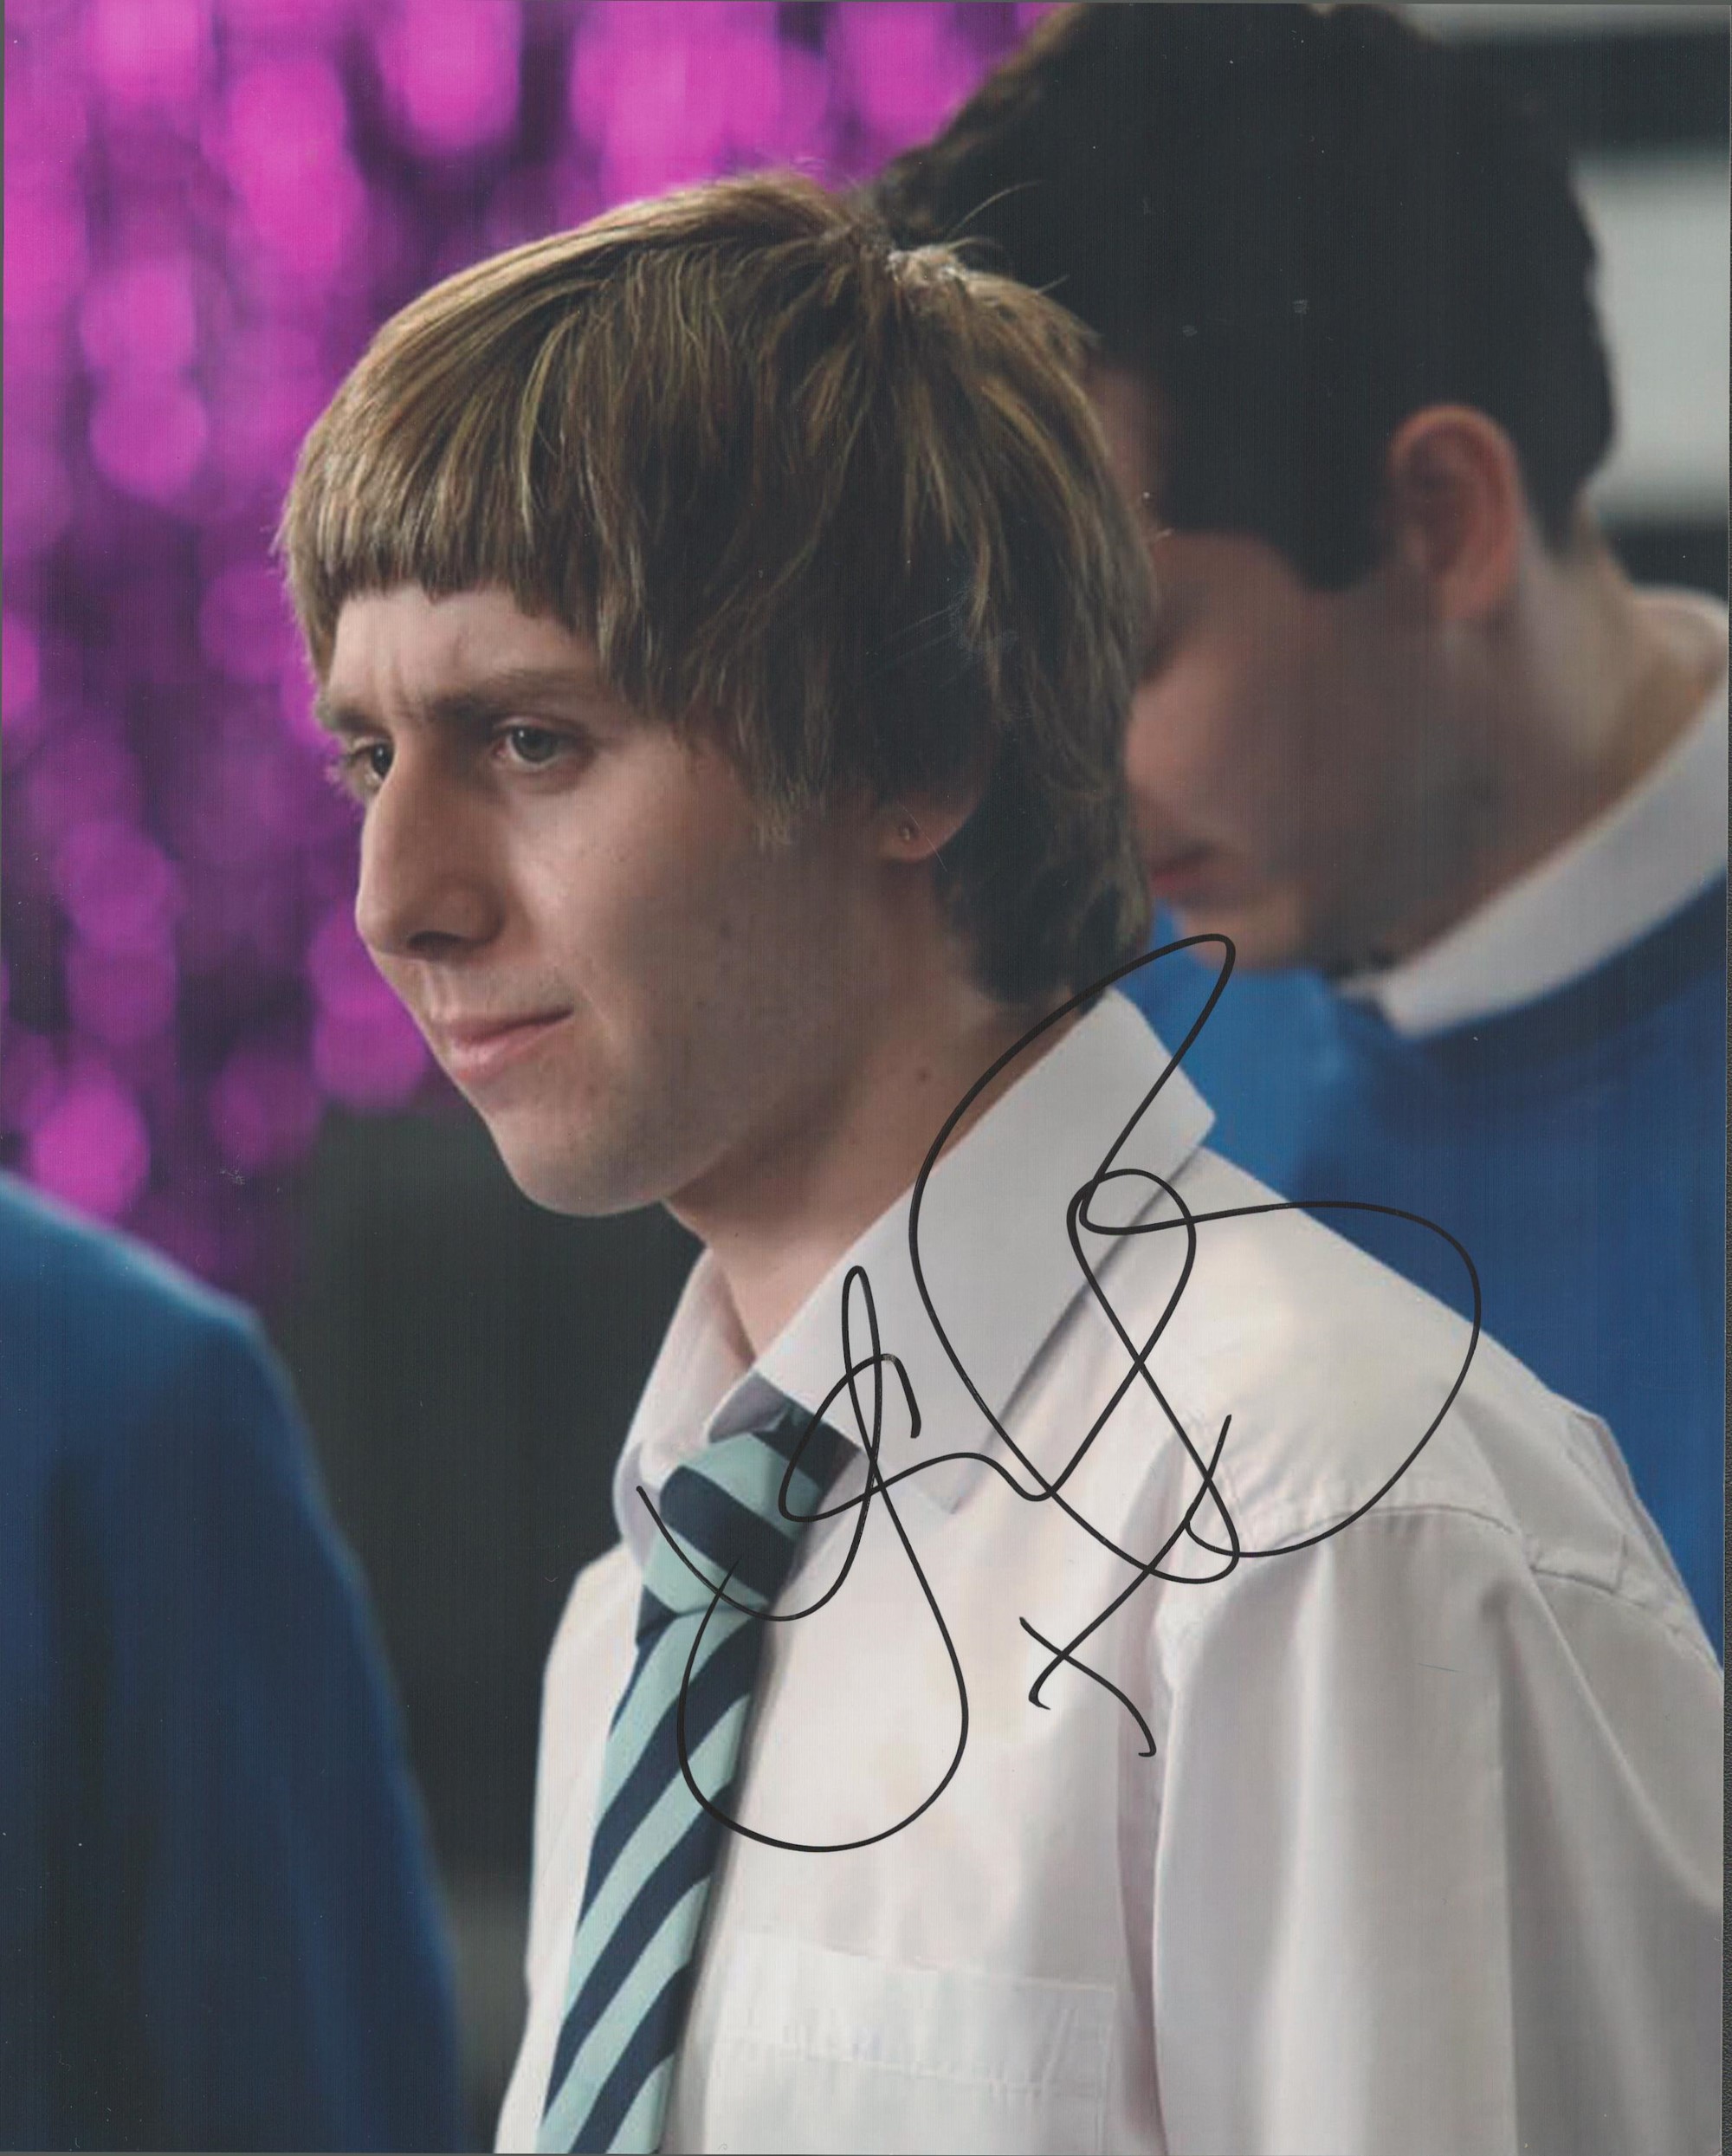 The Inbetweeners Actor, James Buckley signed 10x8 colour photograph pictured during his time playing